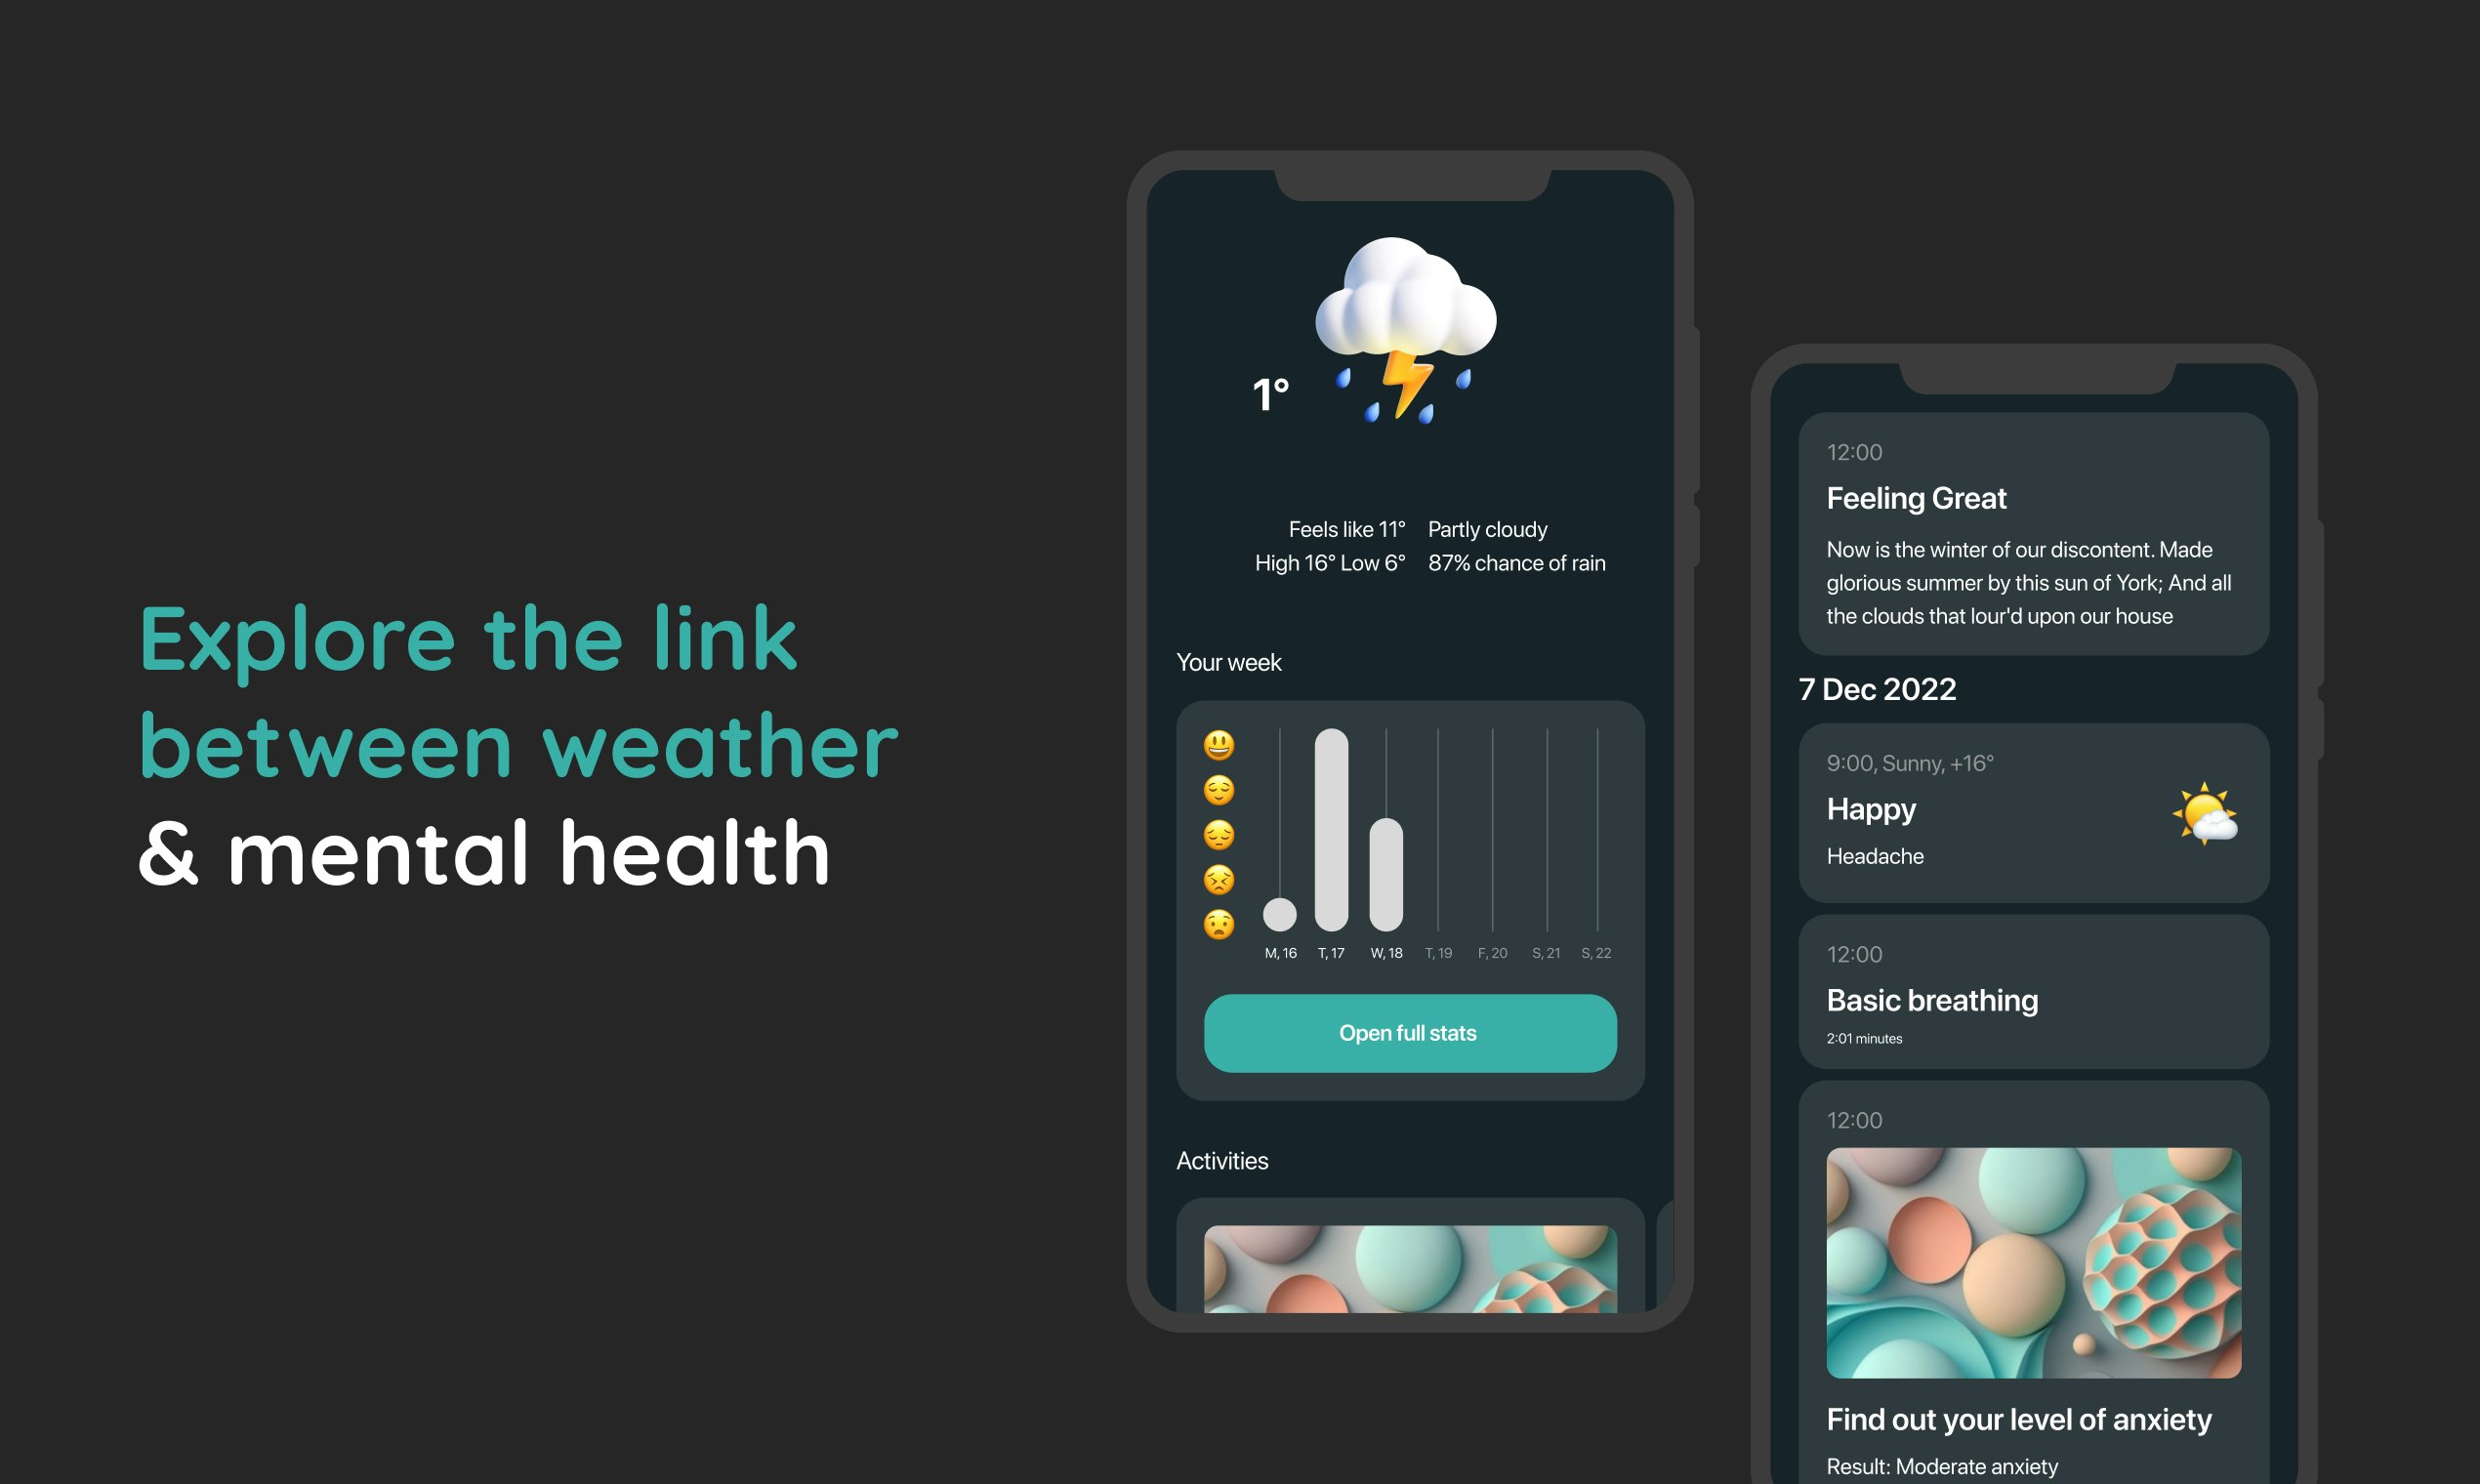 startuptile WeatherMind: Health & Forecast-Understand how weather affects your health & wellbeing